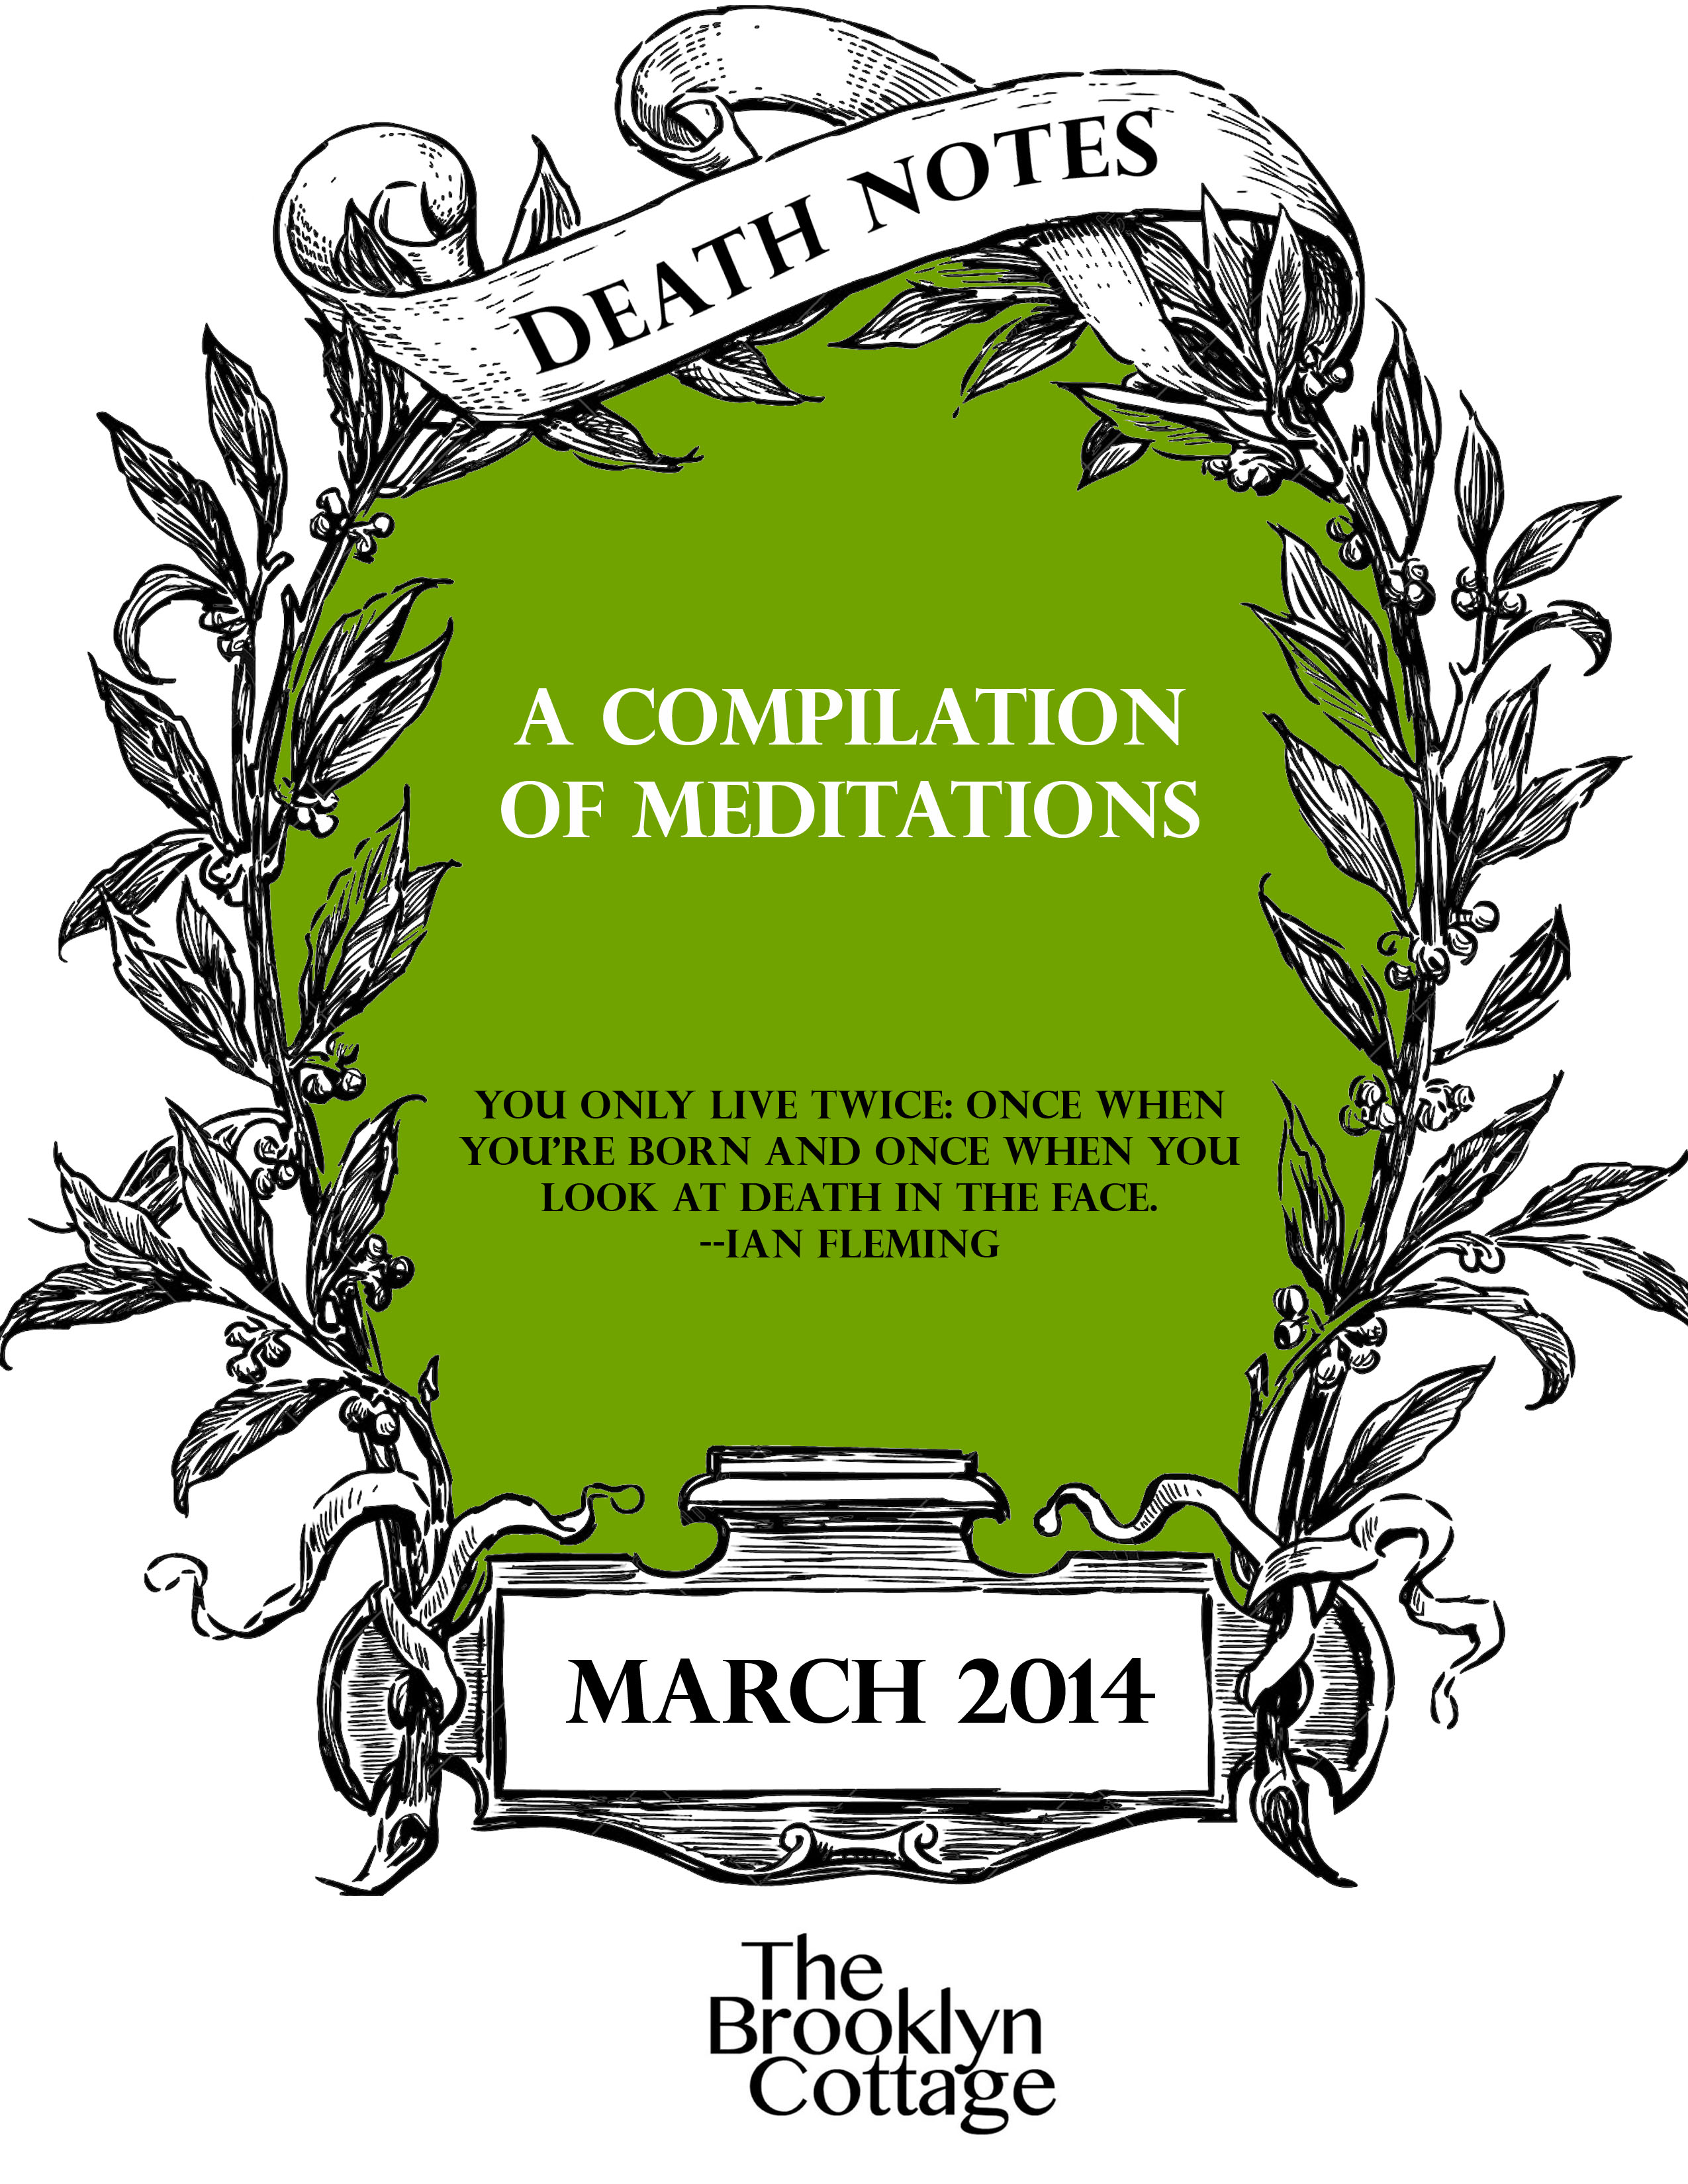 Death Notes: A Compilation of Meditations